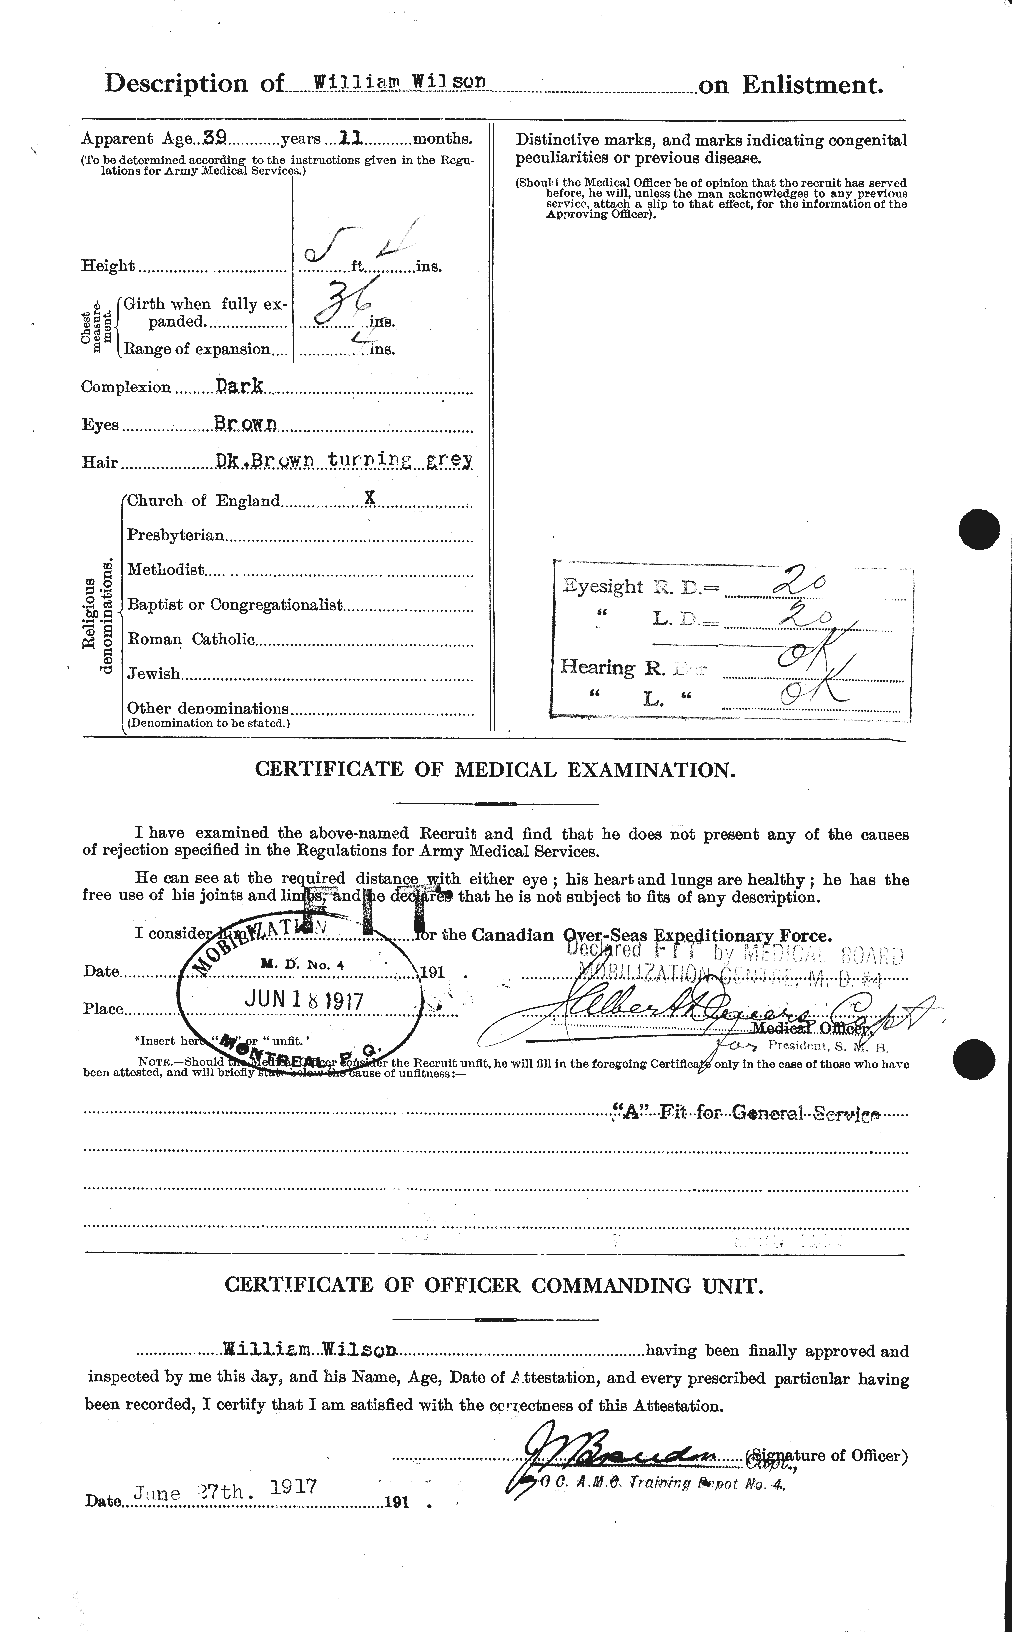 Personnel Records of the First World War - CEF 681815b